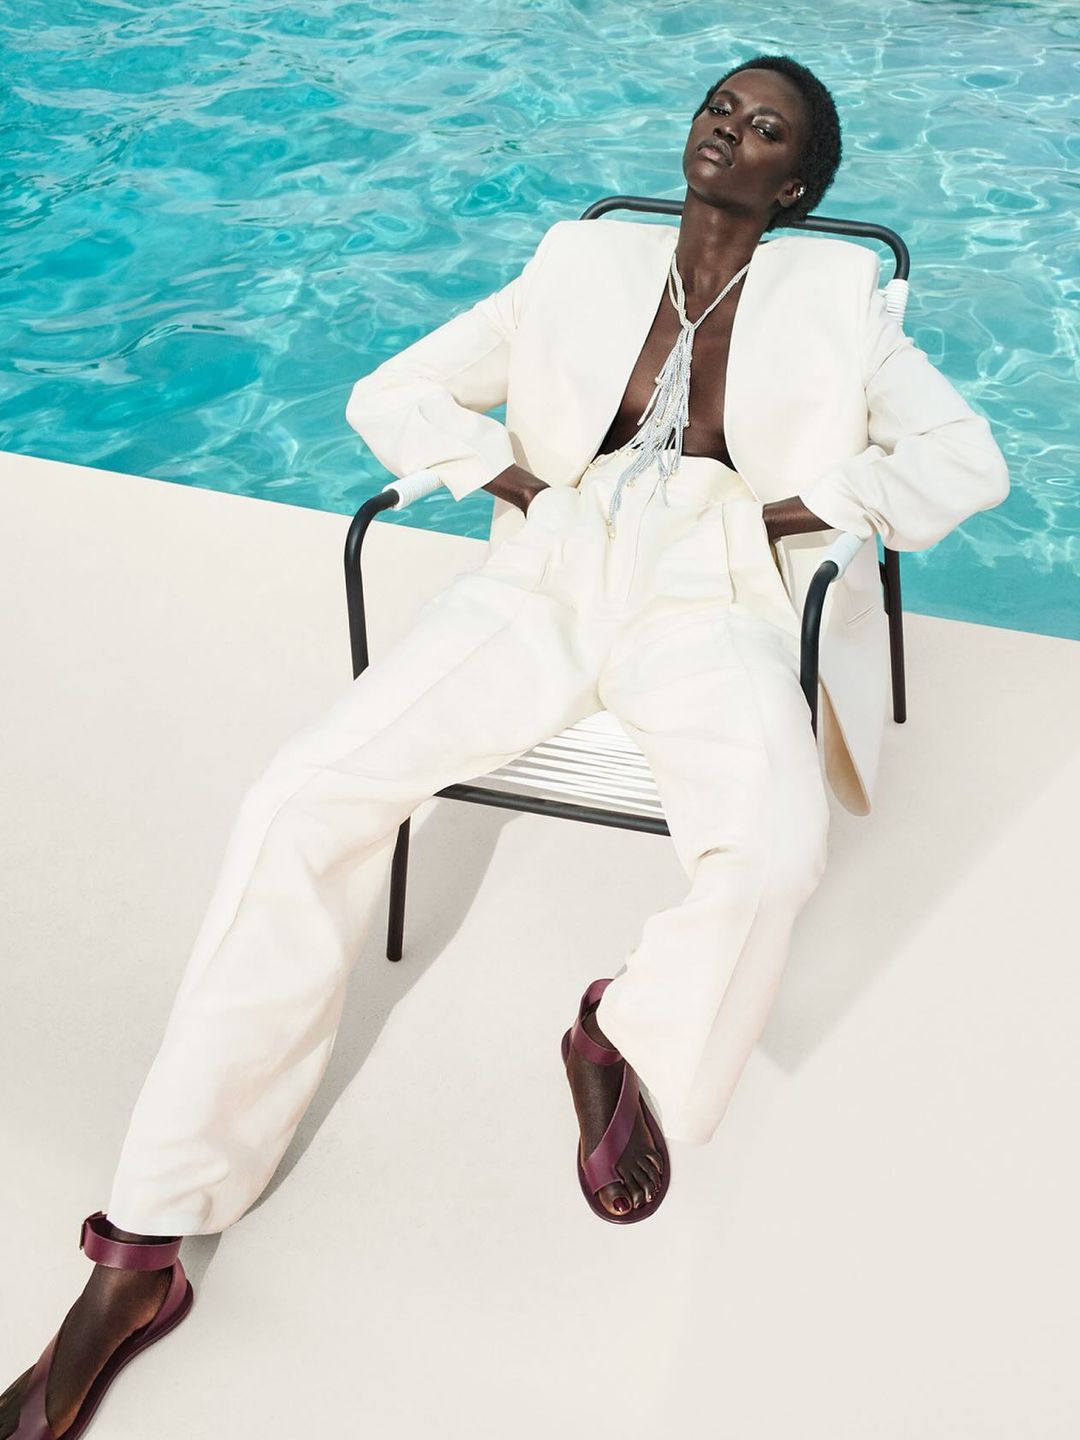 A model poses in a white tailored suit by a pool 